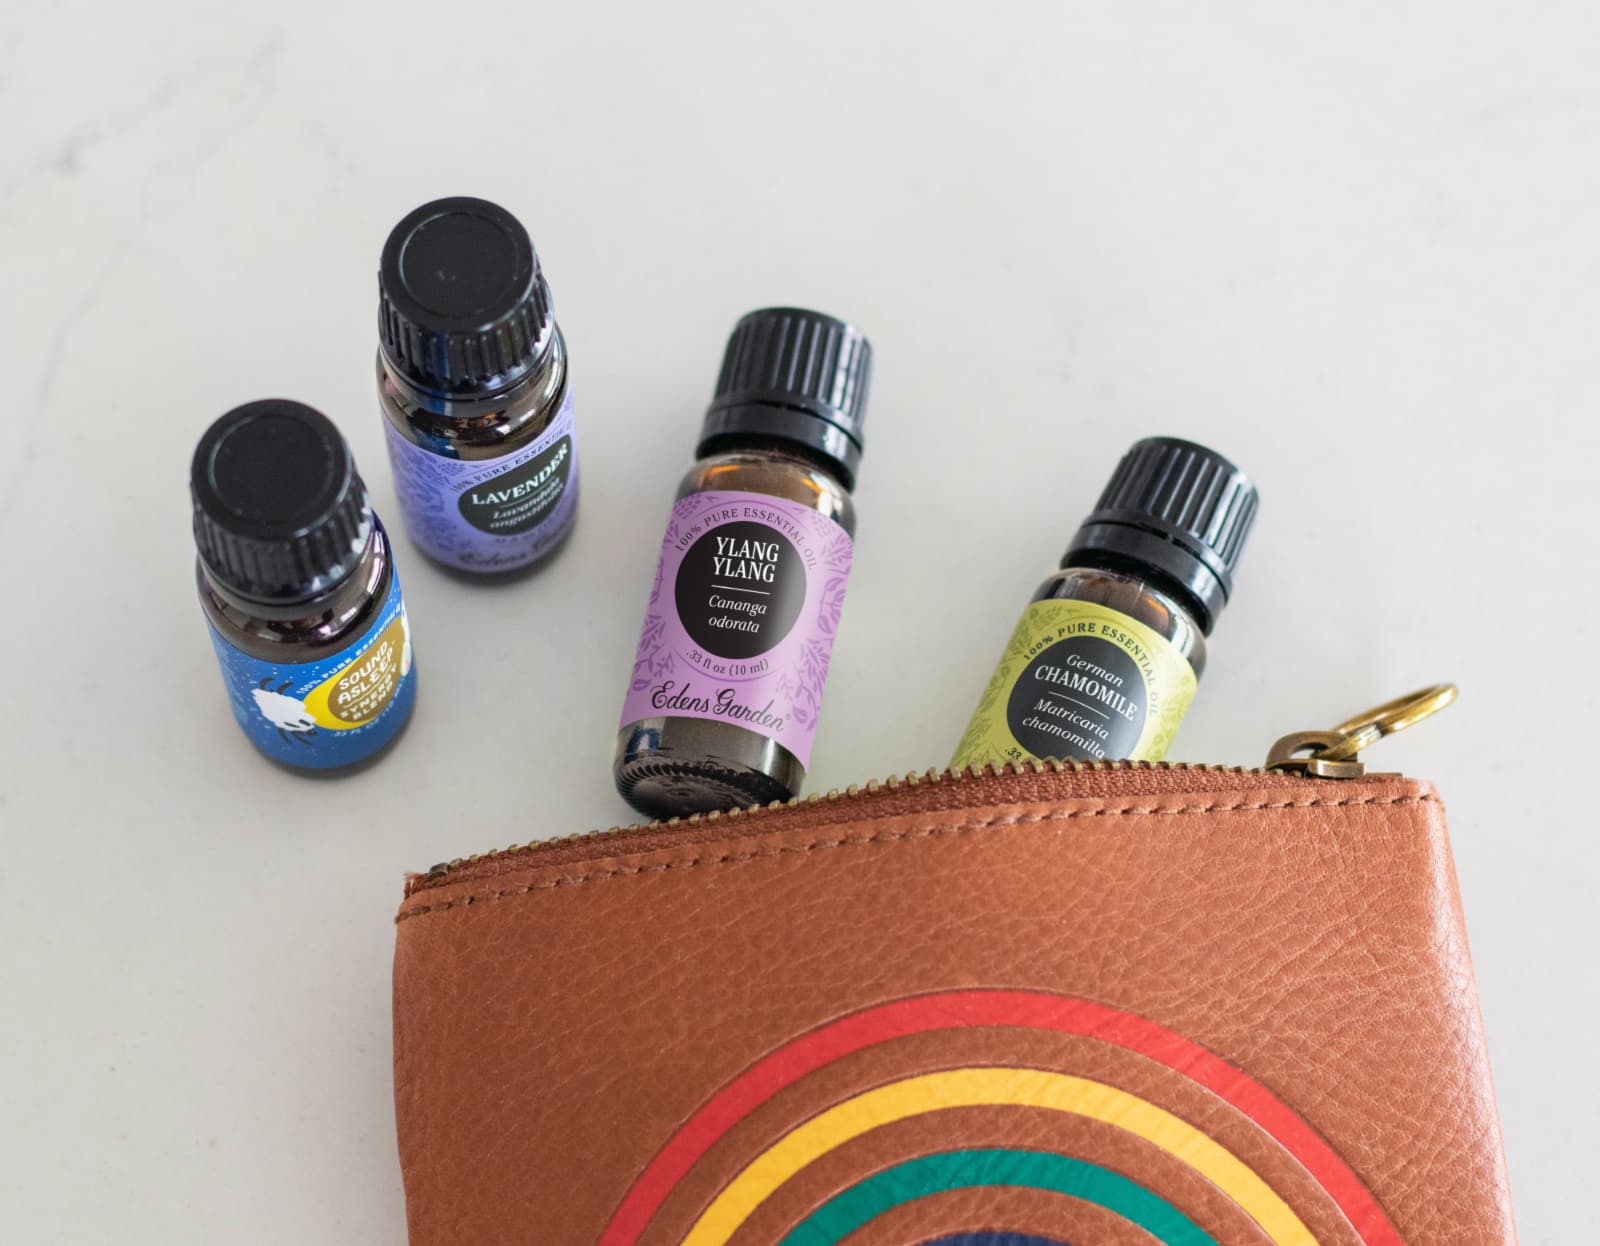 Kid-Friendly Essential Oils – Most-Recommended Oils for Kids 7 years+